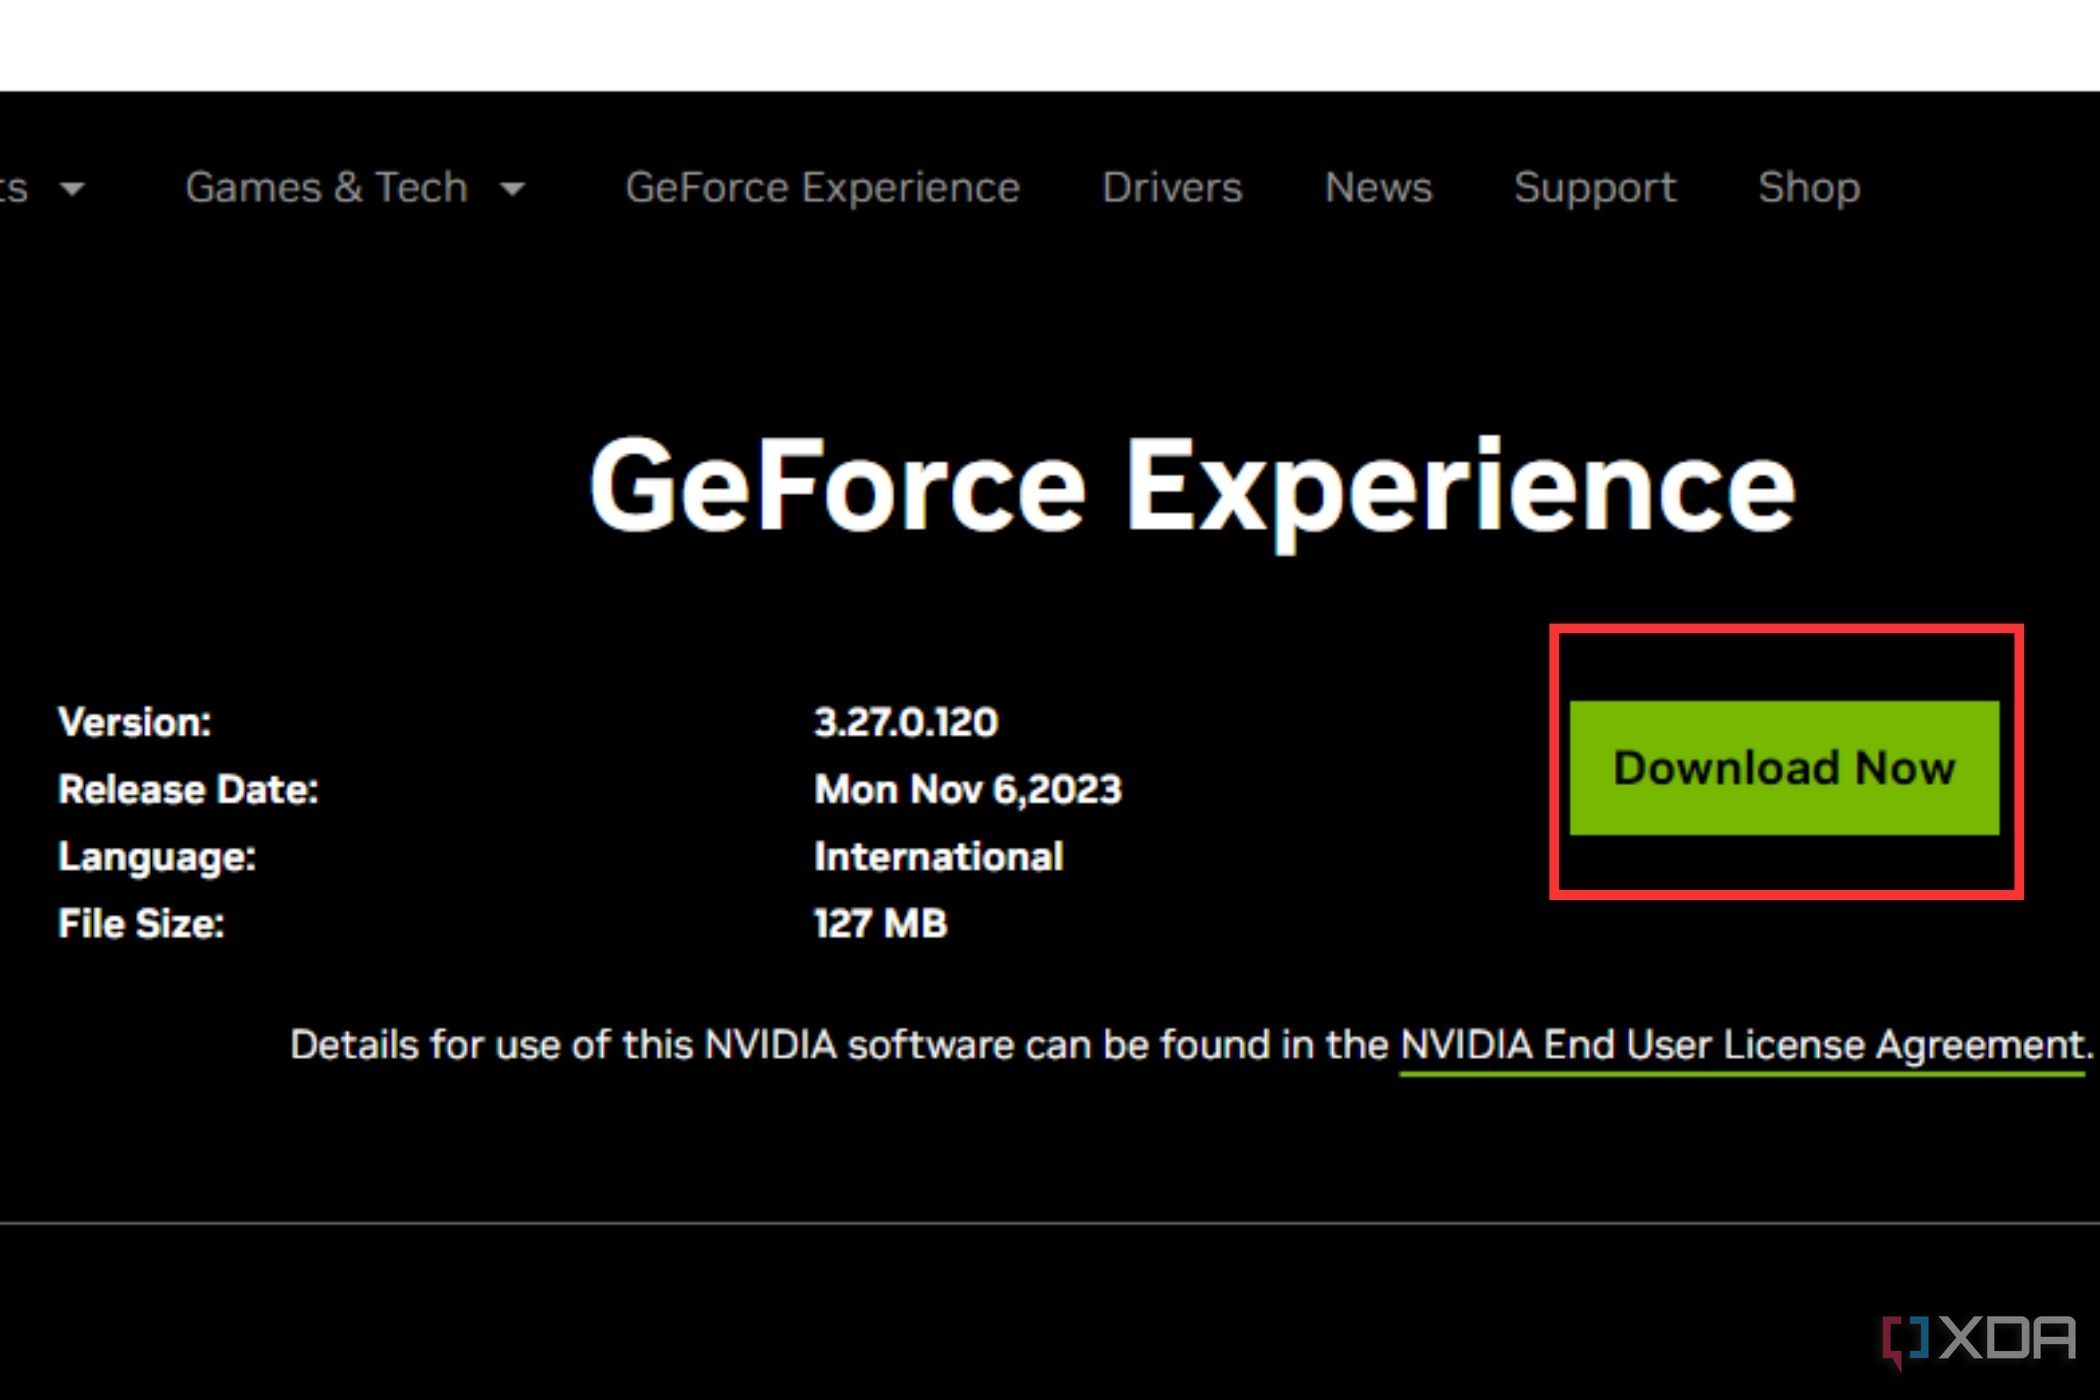 A screenshot showing the highlighted download button on the geforce experience website.